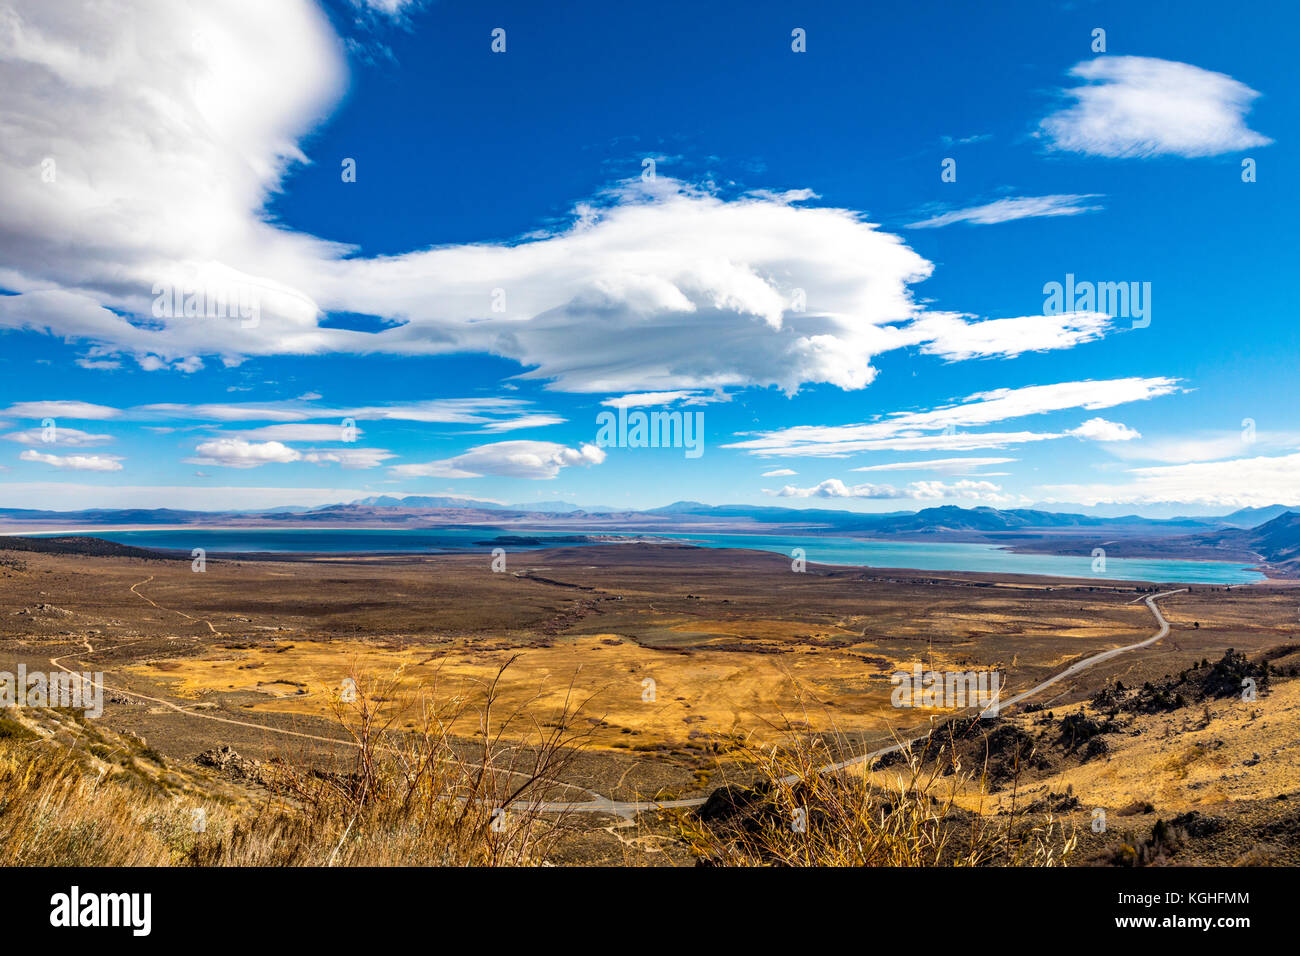 From Mono Lake Vista Point along California Highway 395 in the Eastern Sierra Nevada mountains. Stock Photo